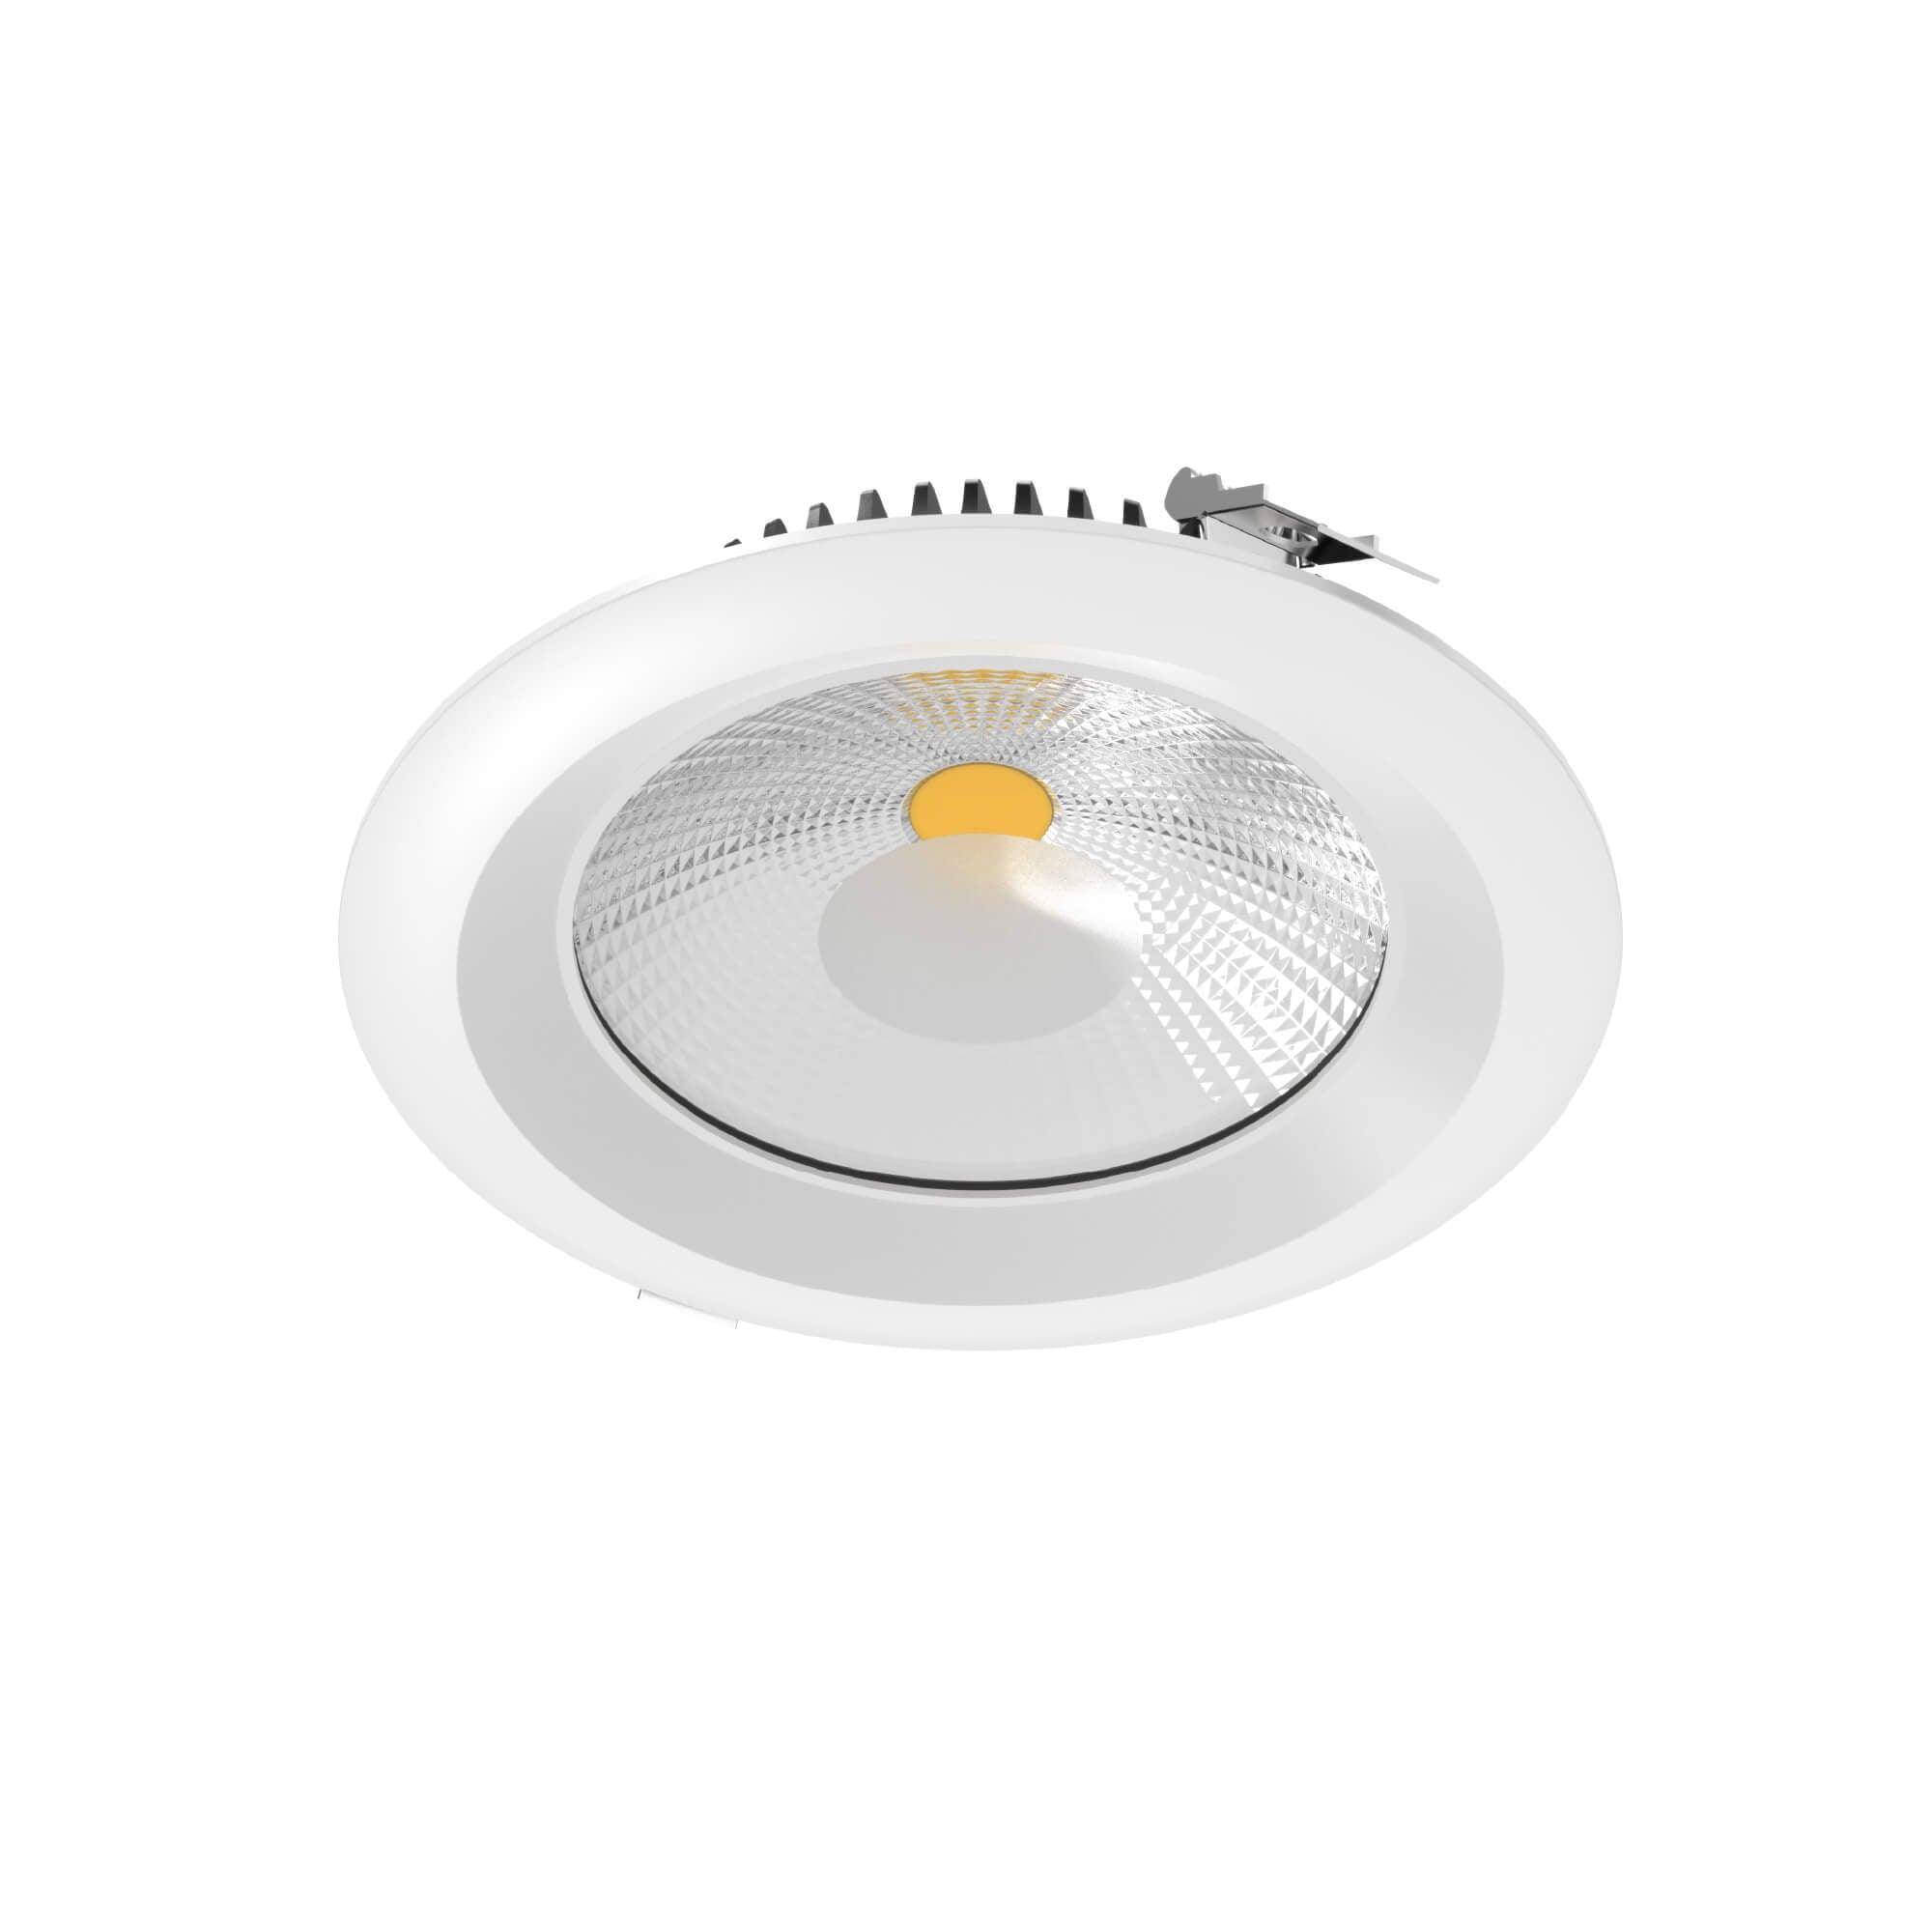 Dals Lighting - HPD 8 Inch High Powered LED Commercial Down Light - HPD8-CC-V-WH | Montreal Lighting & Hardware